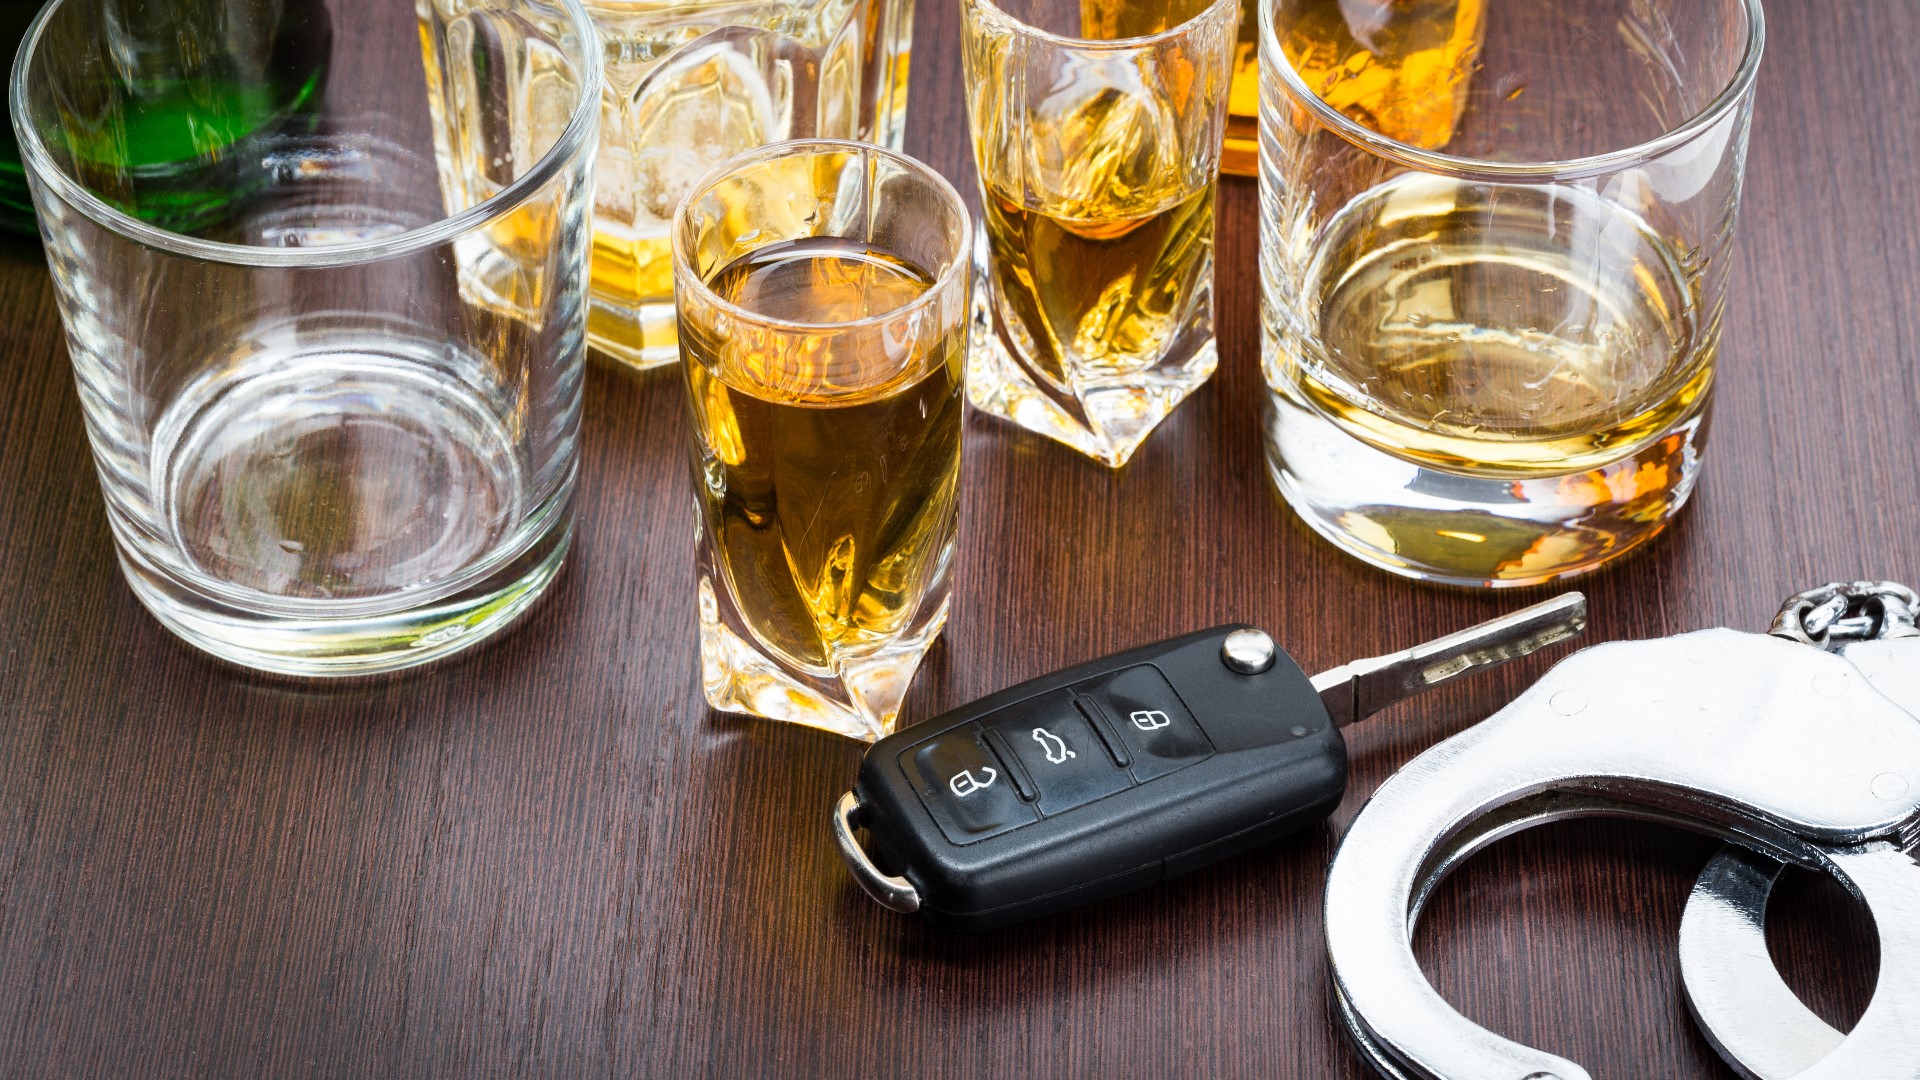 HPD will be out all over the city this weekend looking for impaired drivers. The message? Don't drink and drive.